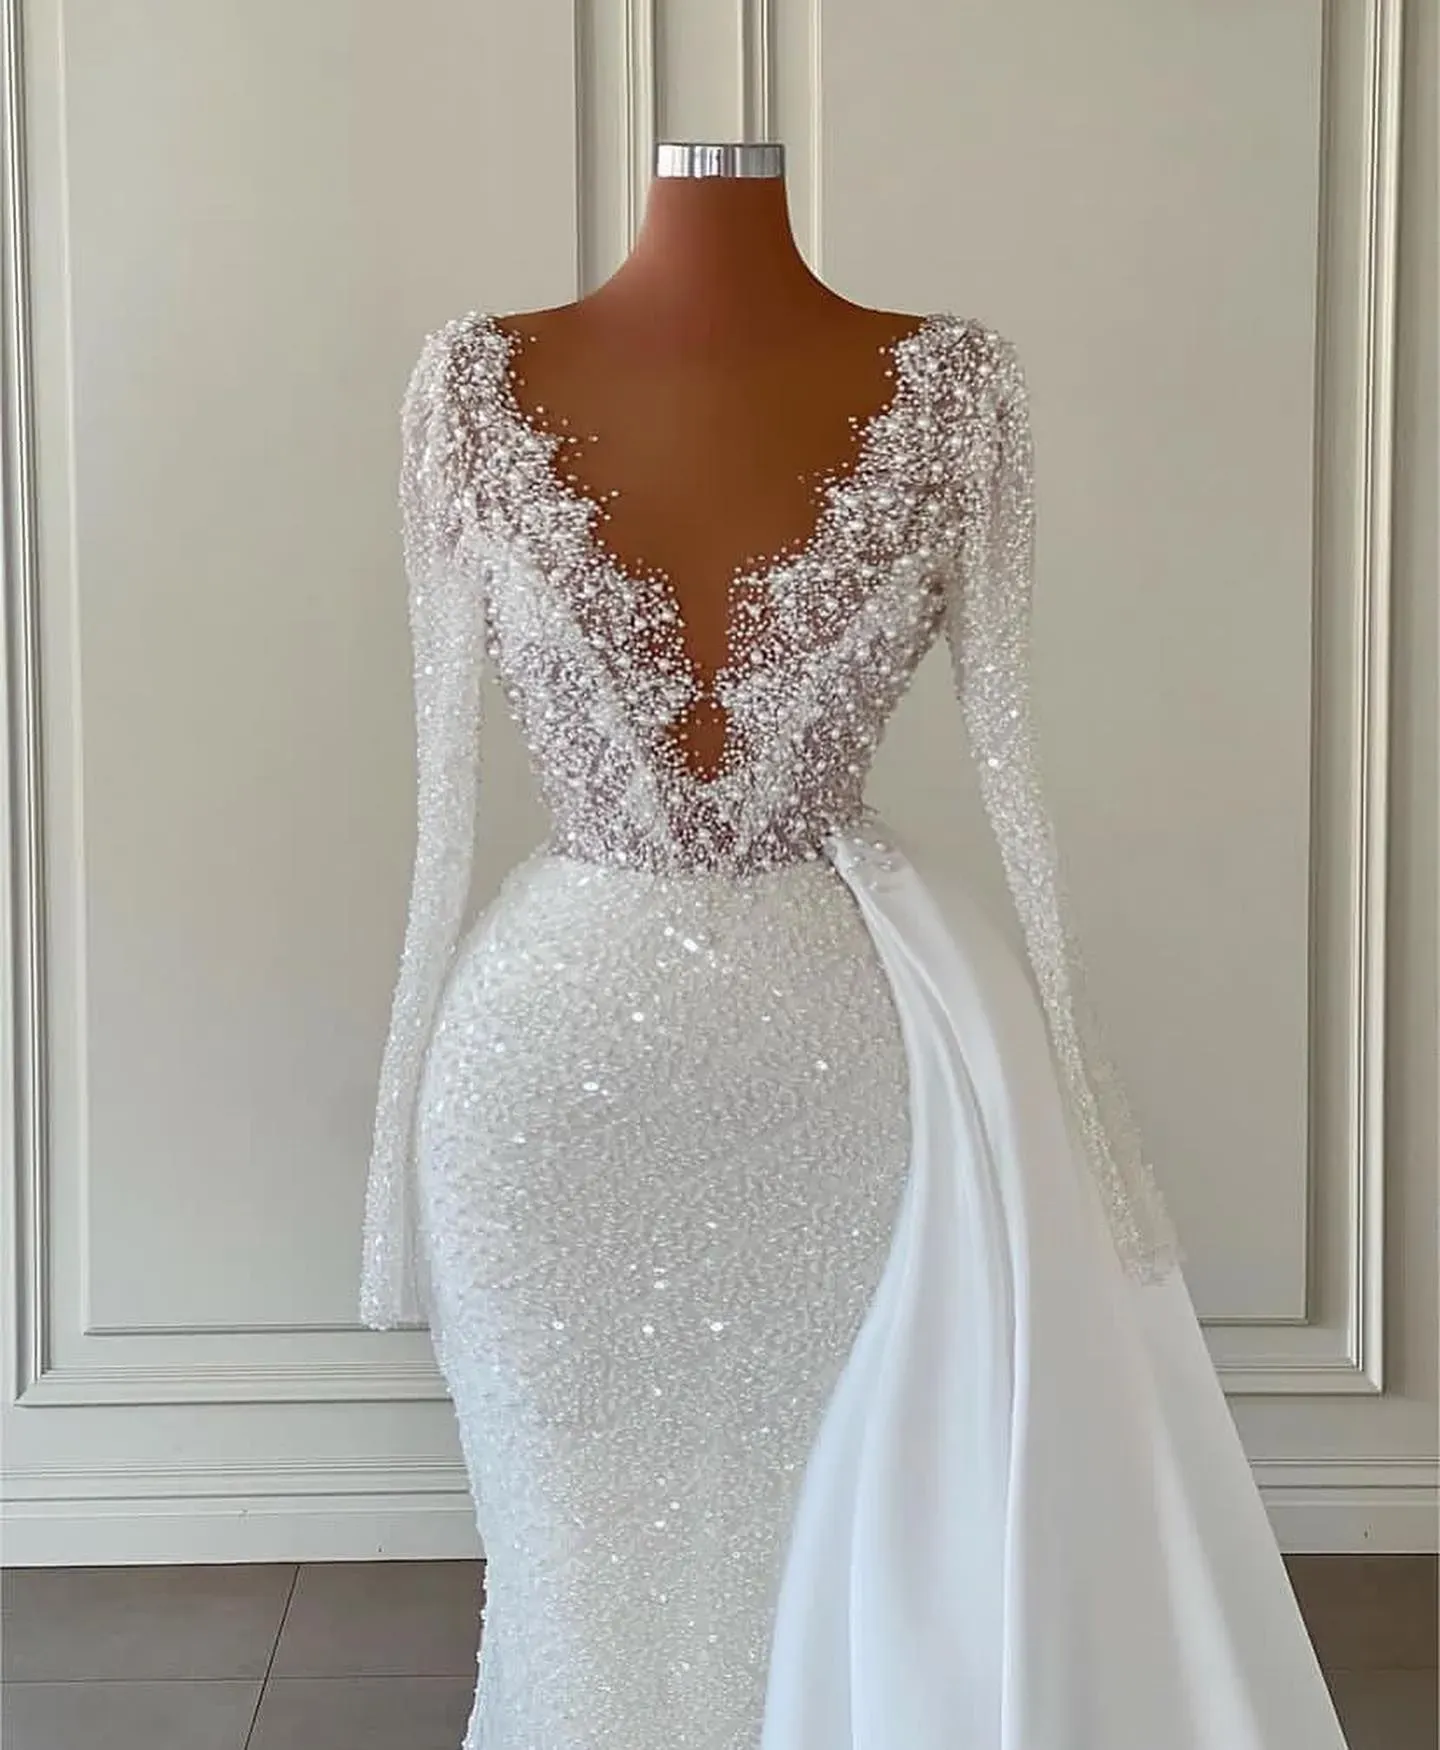 Sexy Sparkly Mermaid Wedding Dress Pearls Beading Sheer V Neck Long Sleeve Beads Bridal Gowns Robe De Soiree